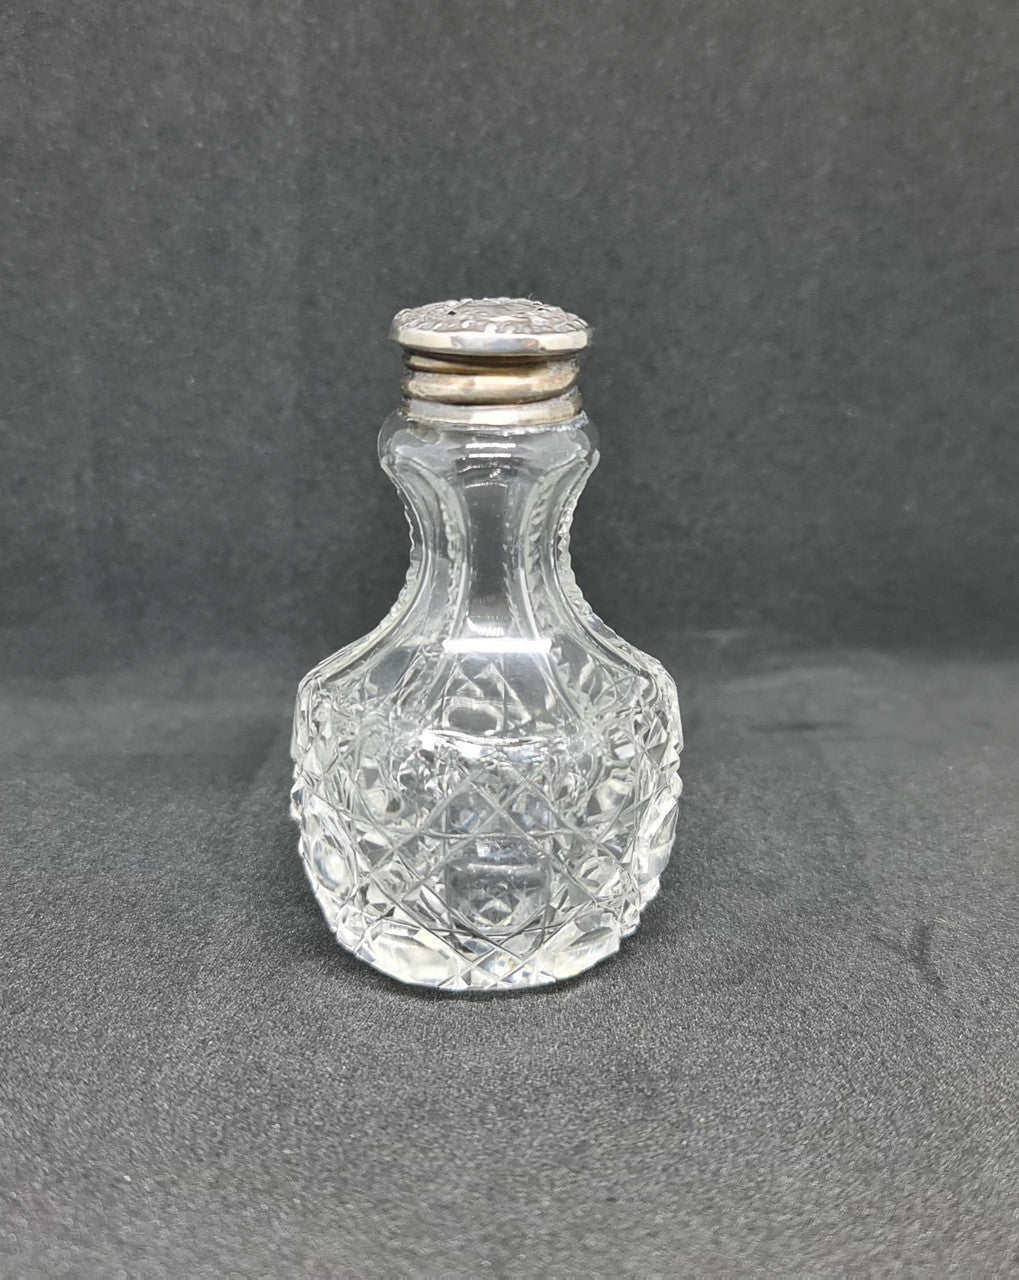 Beautiful Edwardian silver topped glass powder jar with stunning details. In great original condition.